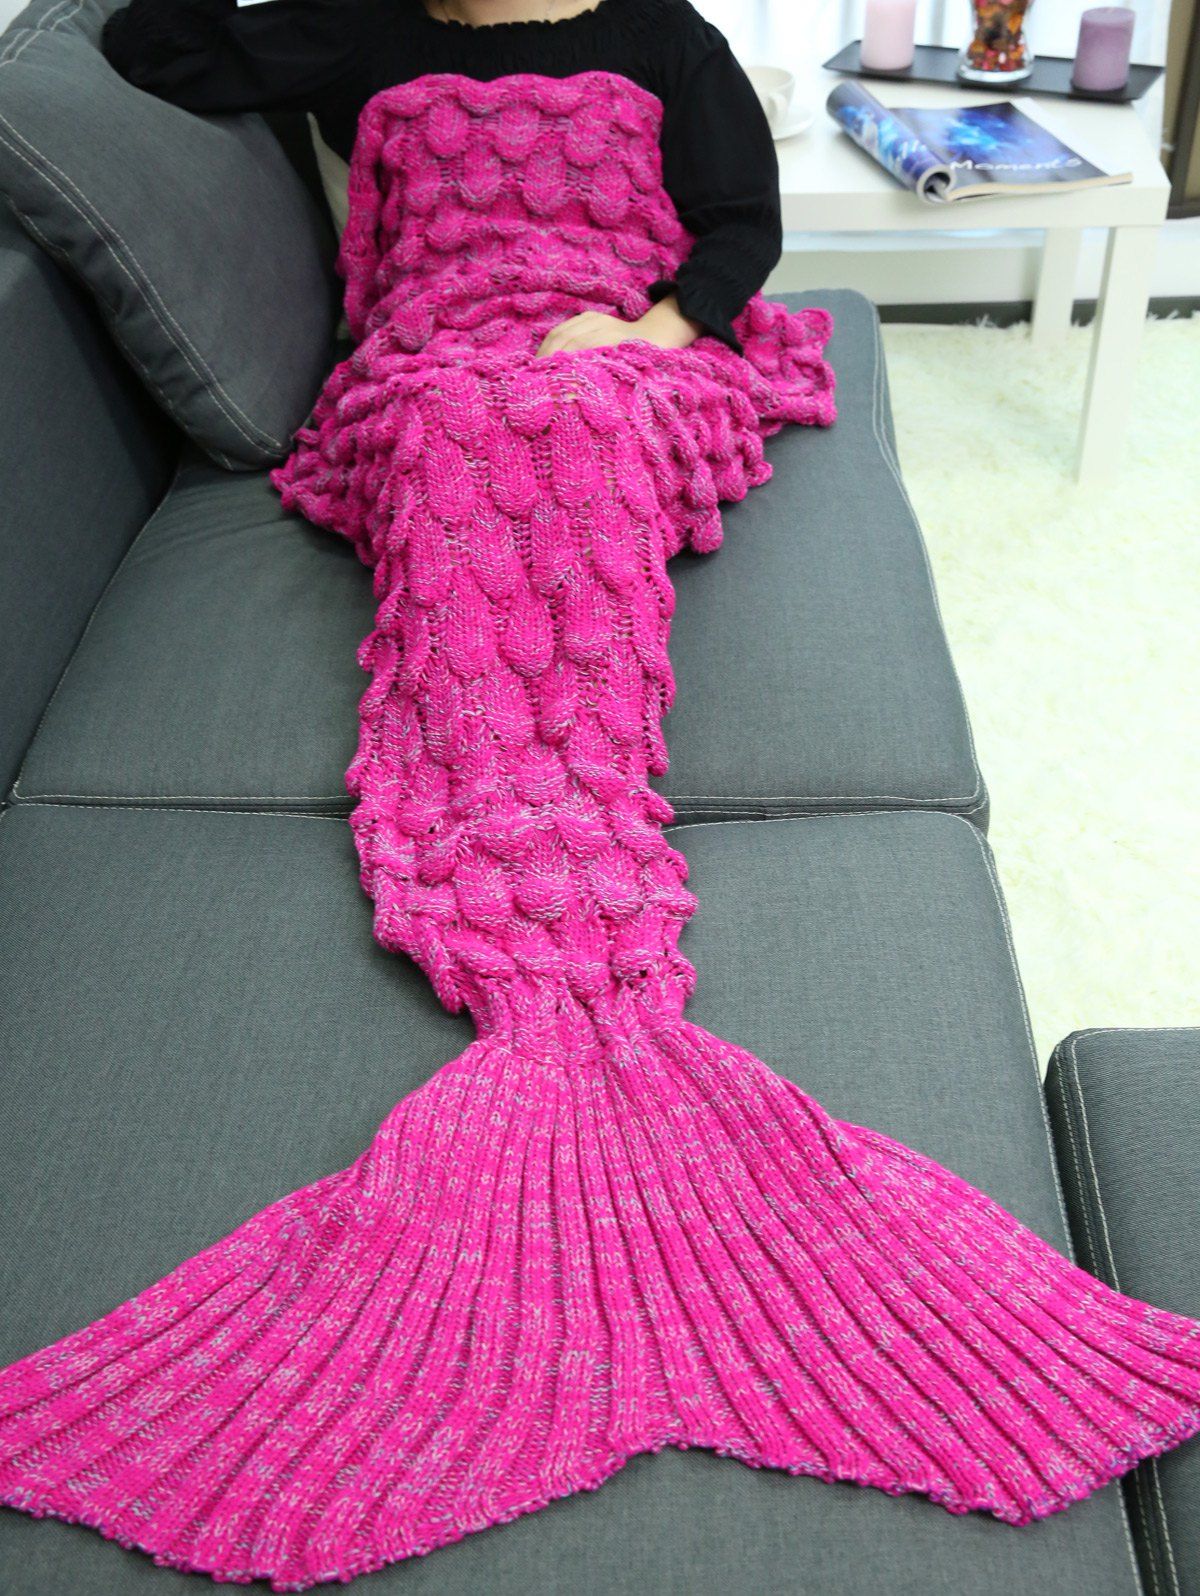 New Knitting Fish Scales Design Mermaid Tail Style Blanket  